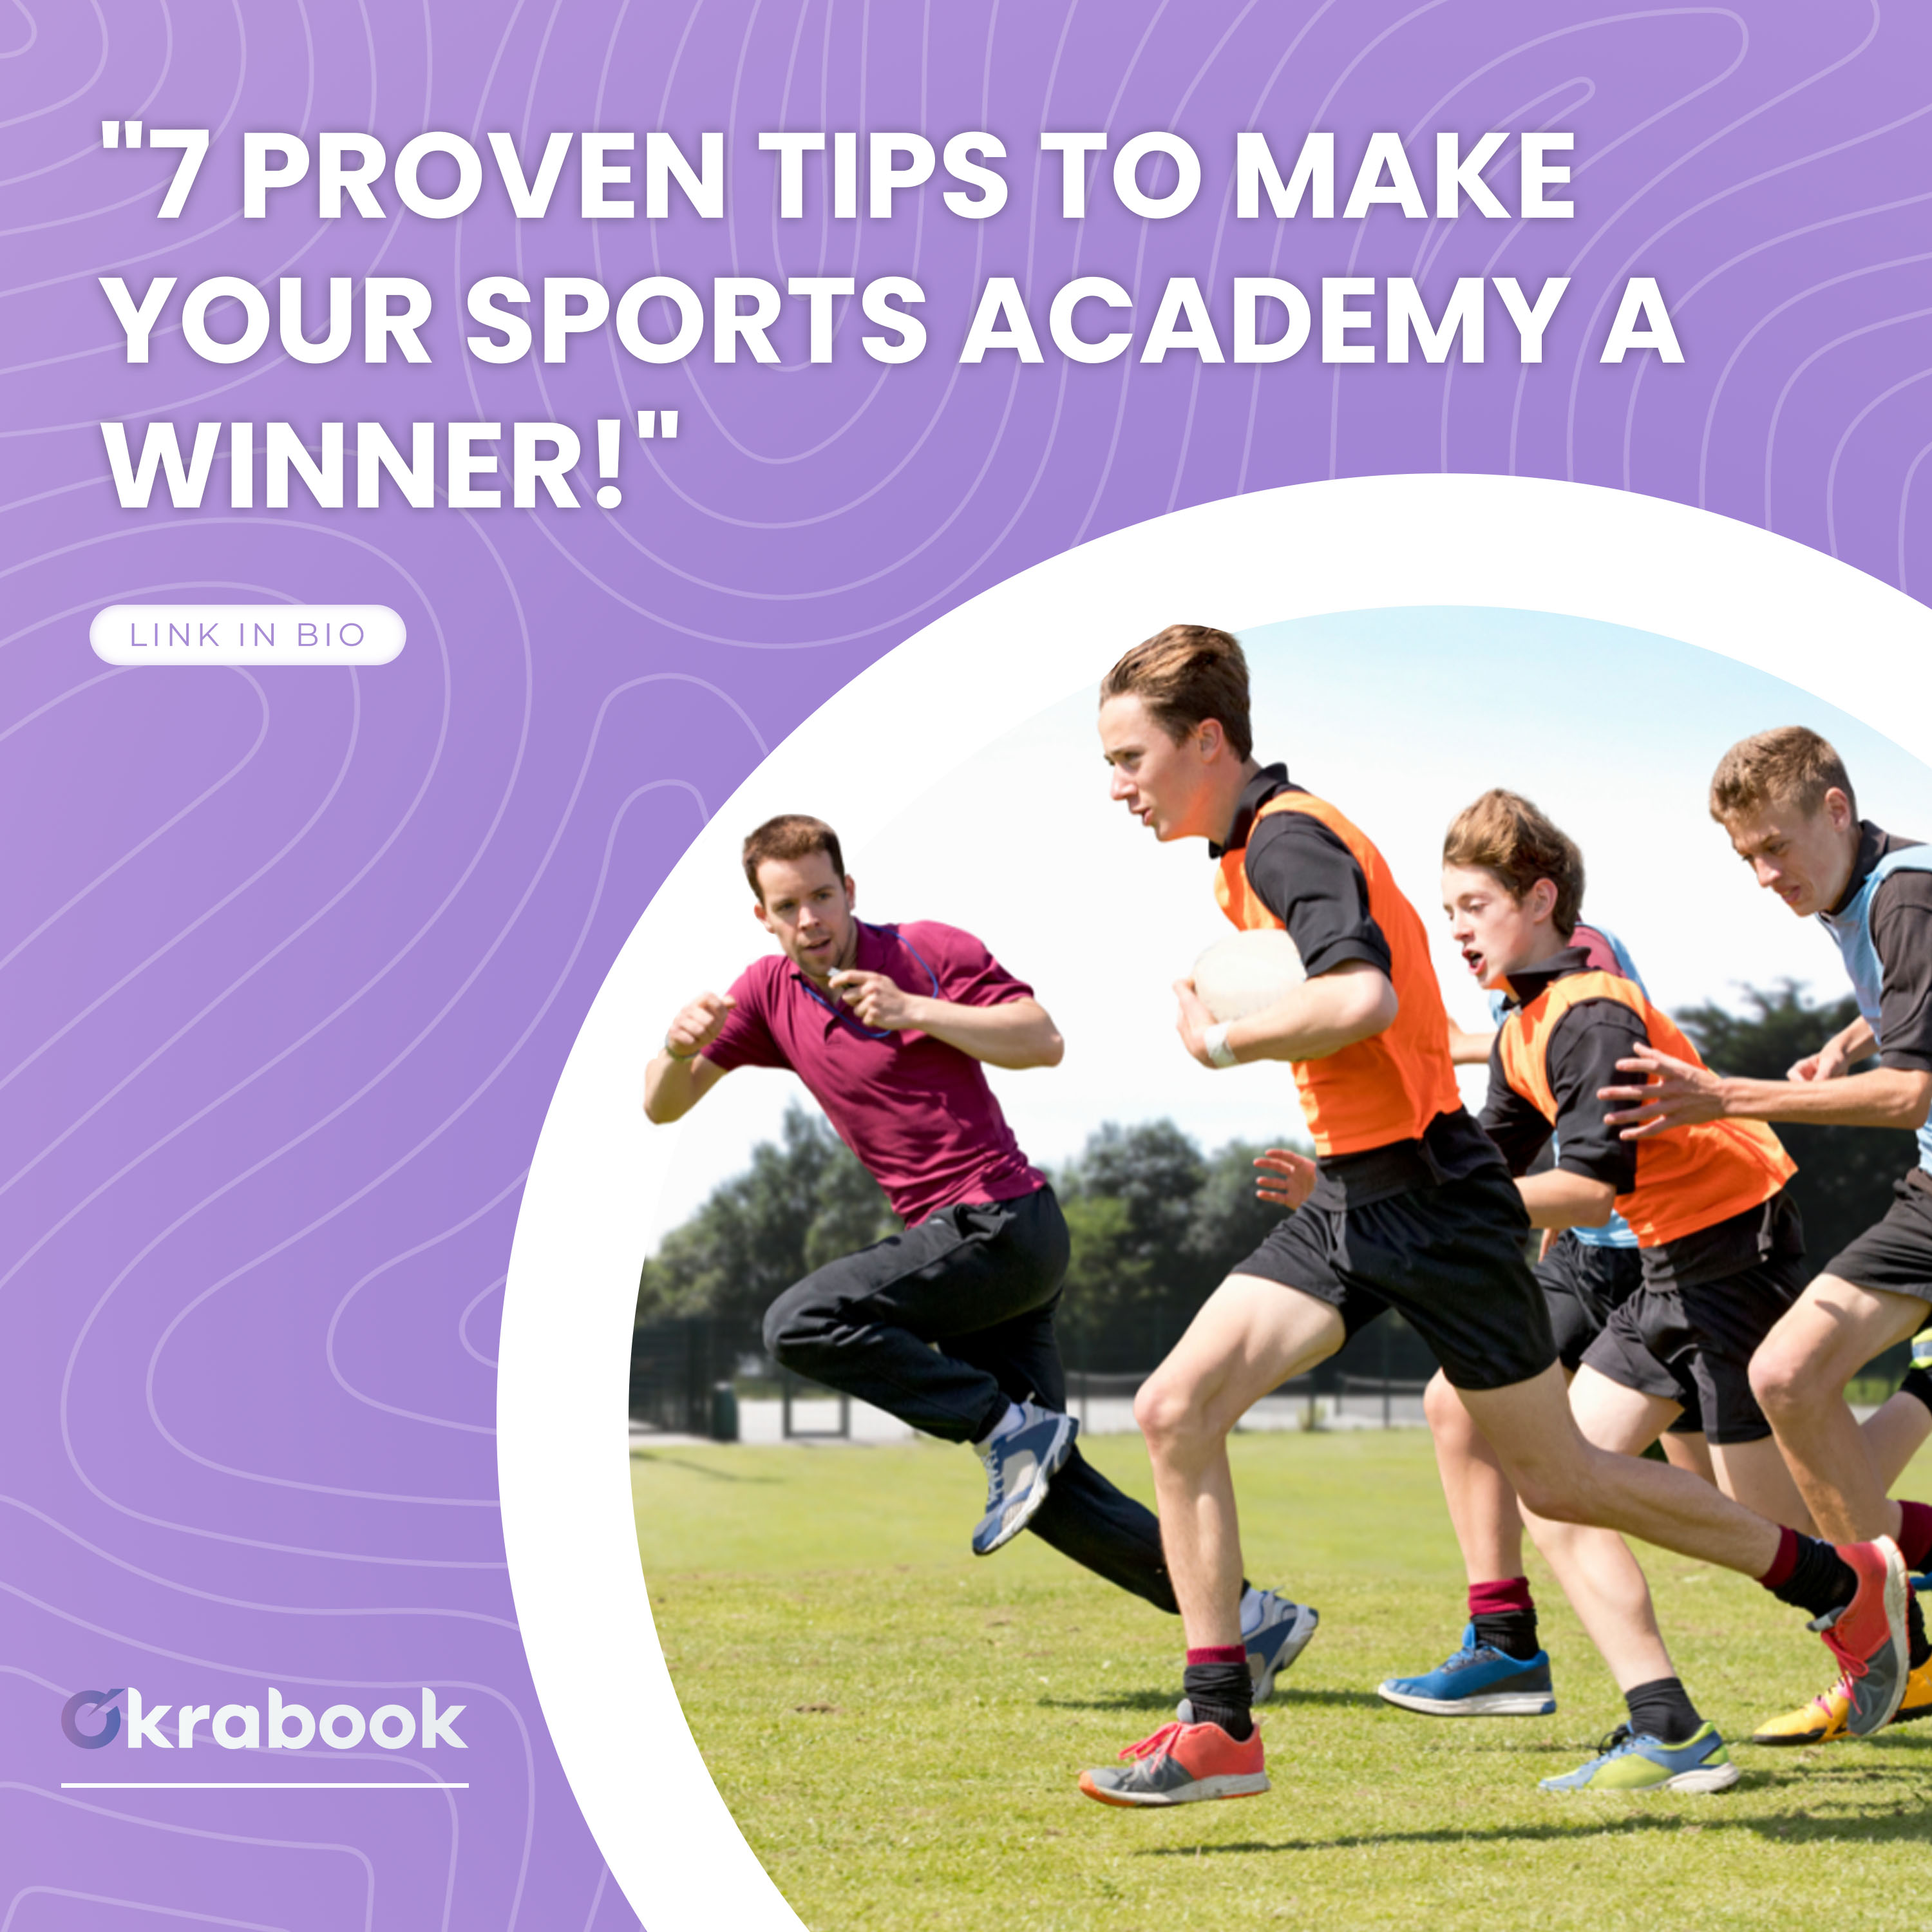 7 Proven Tips to Make Your Sports Academy a Winner!